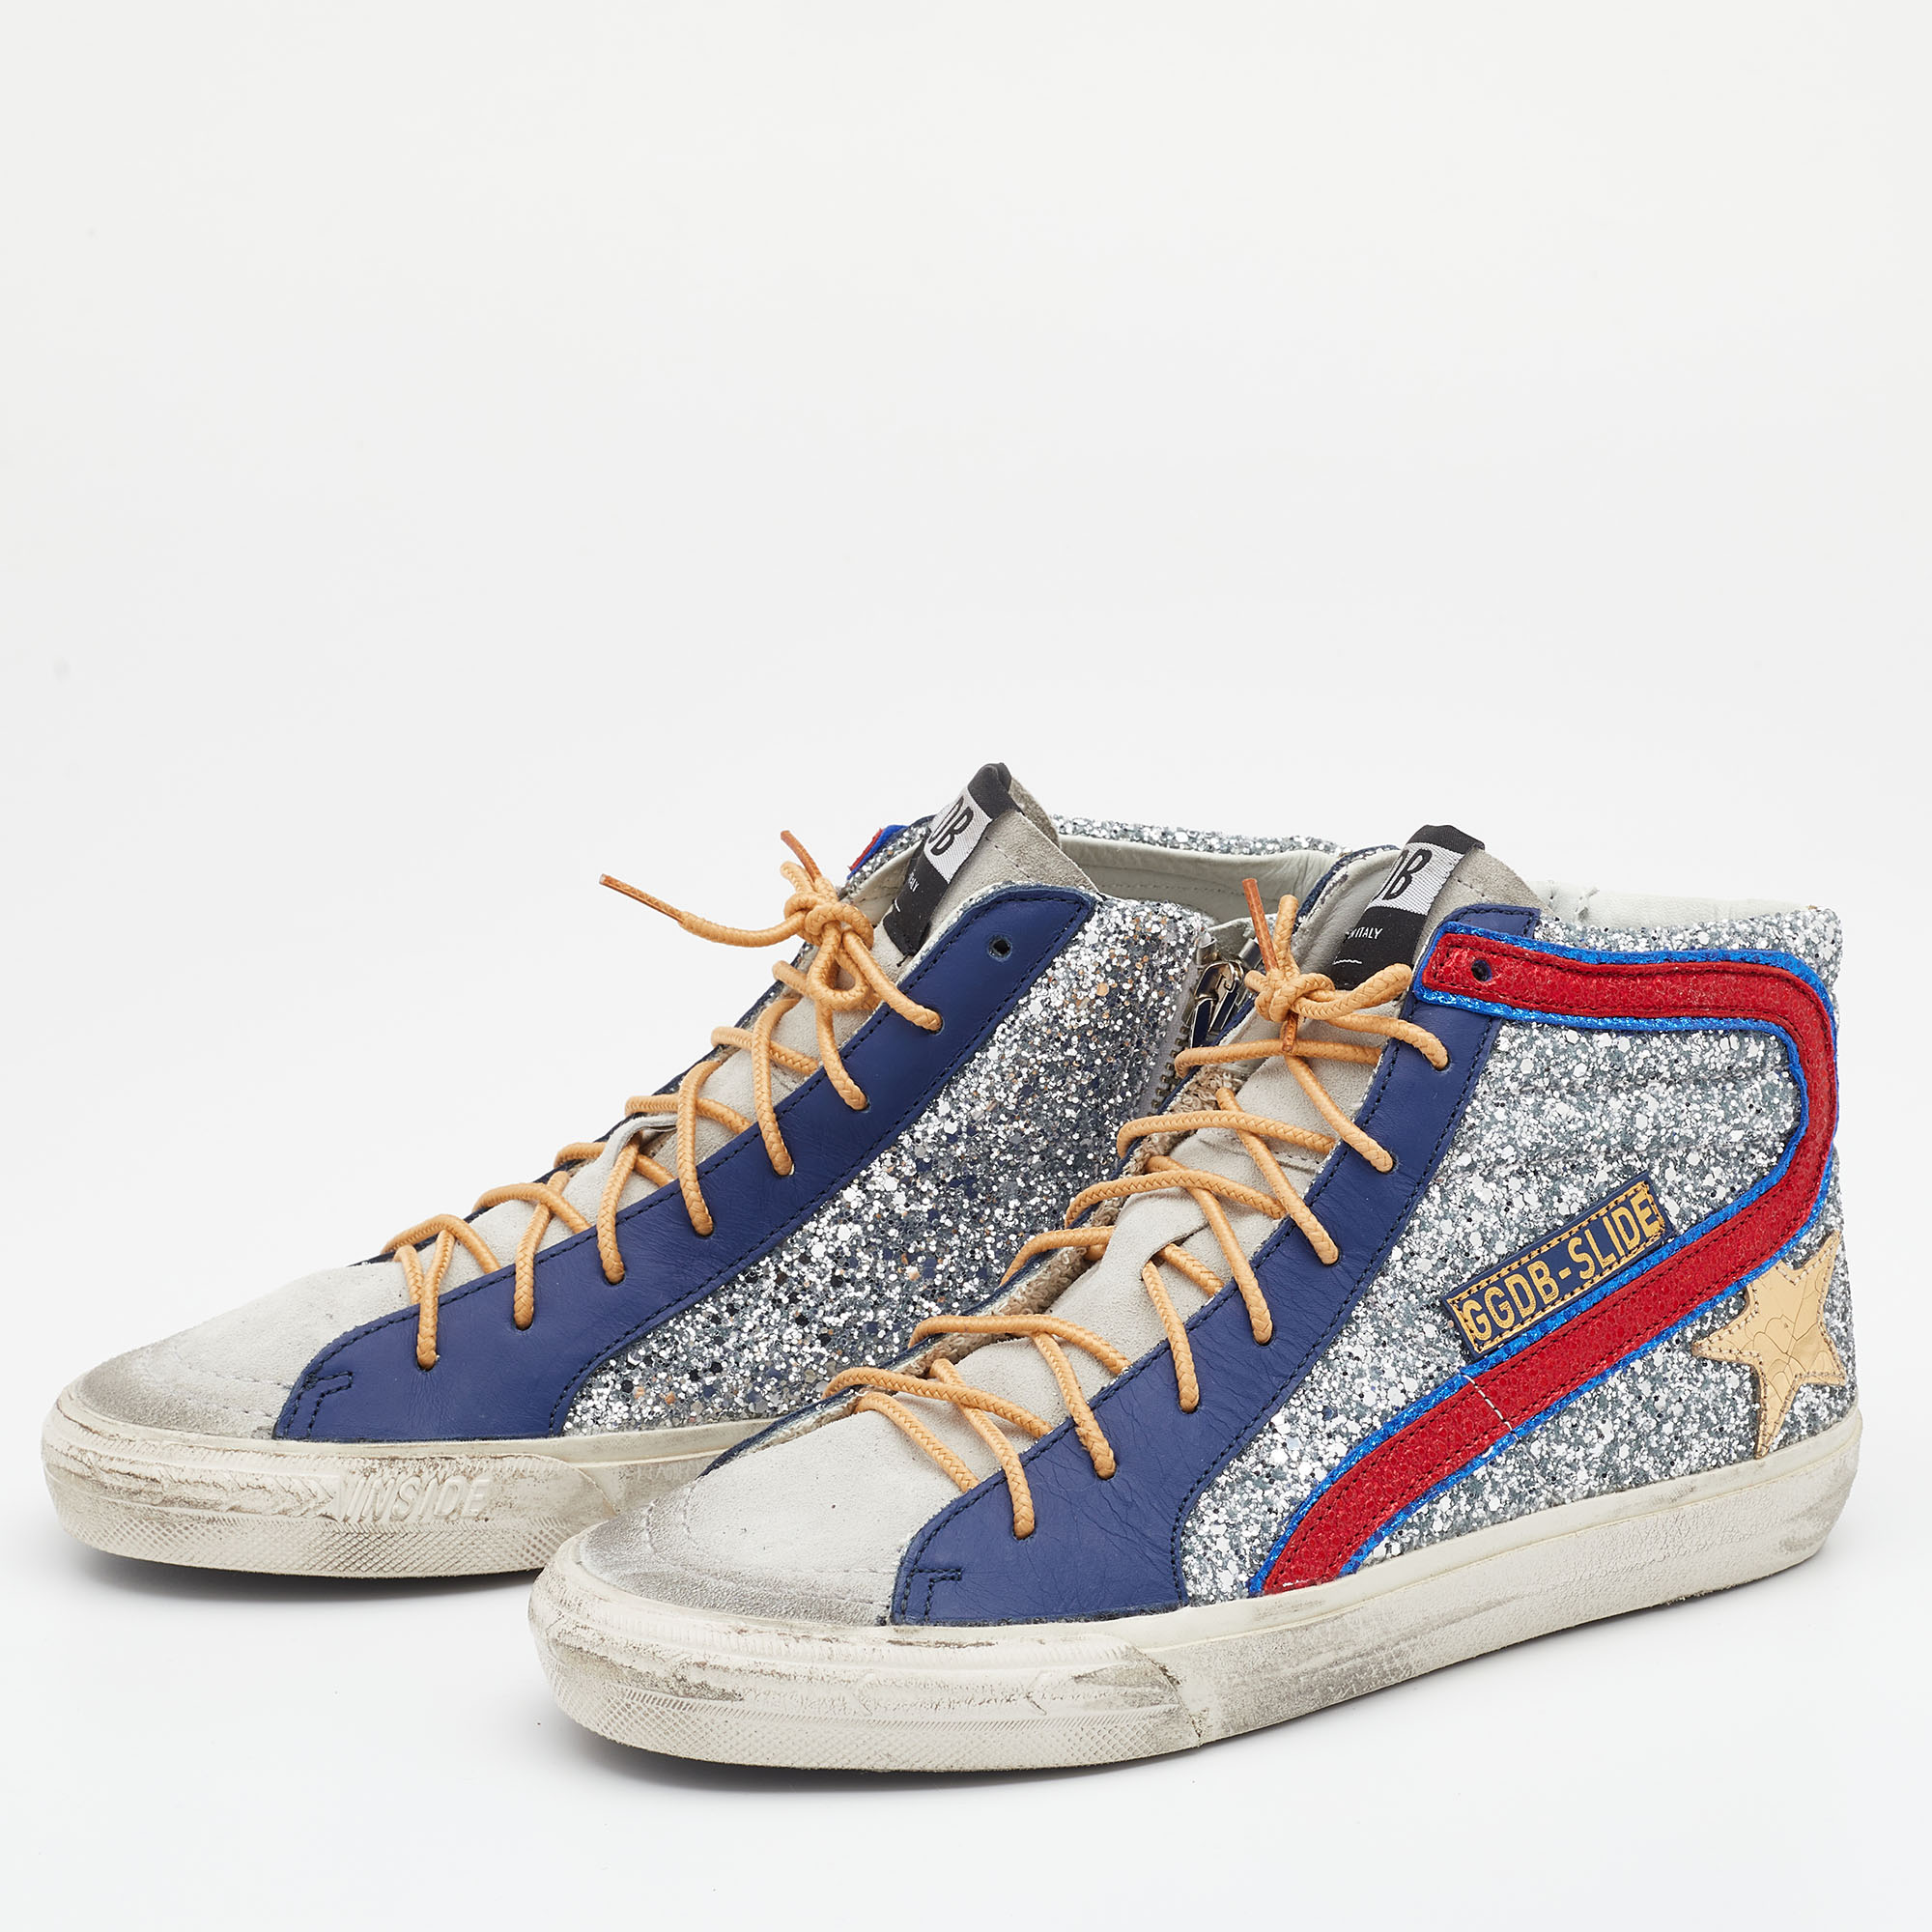 

Golden Goose Multicolor Suede And Glitter GGDB Slide High Top Sneakers Size